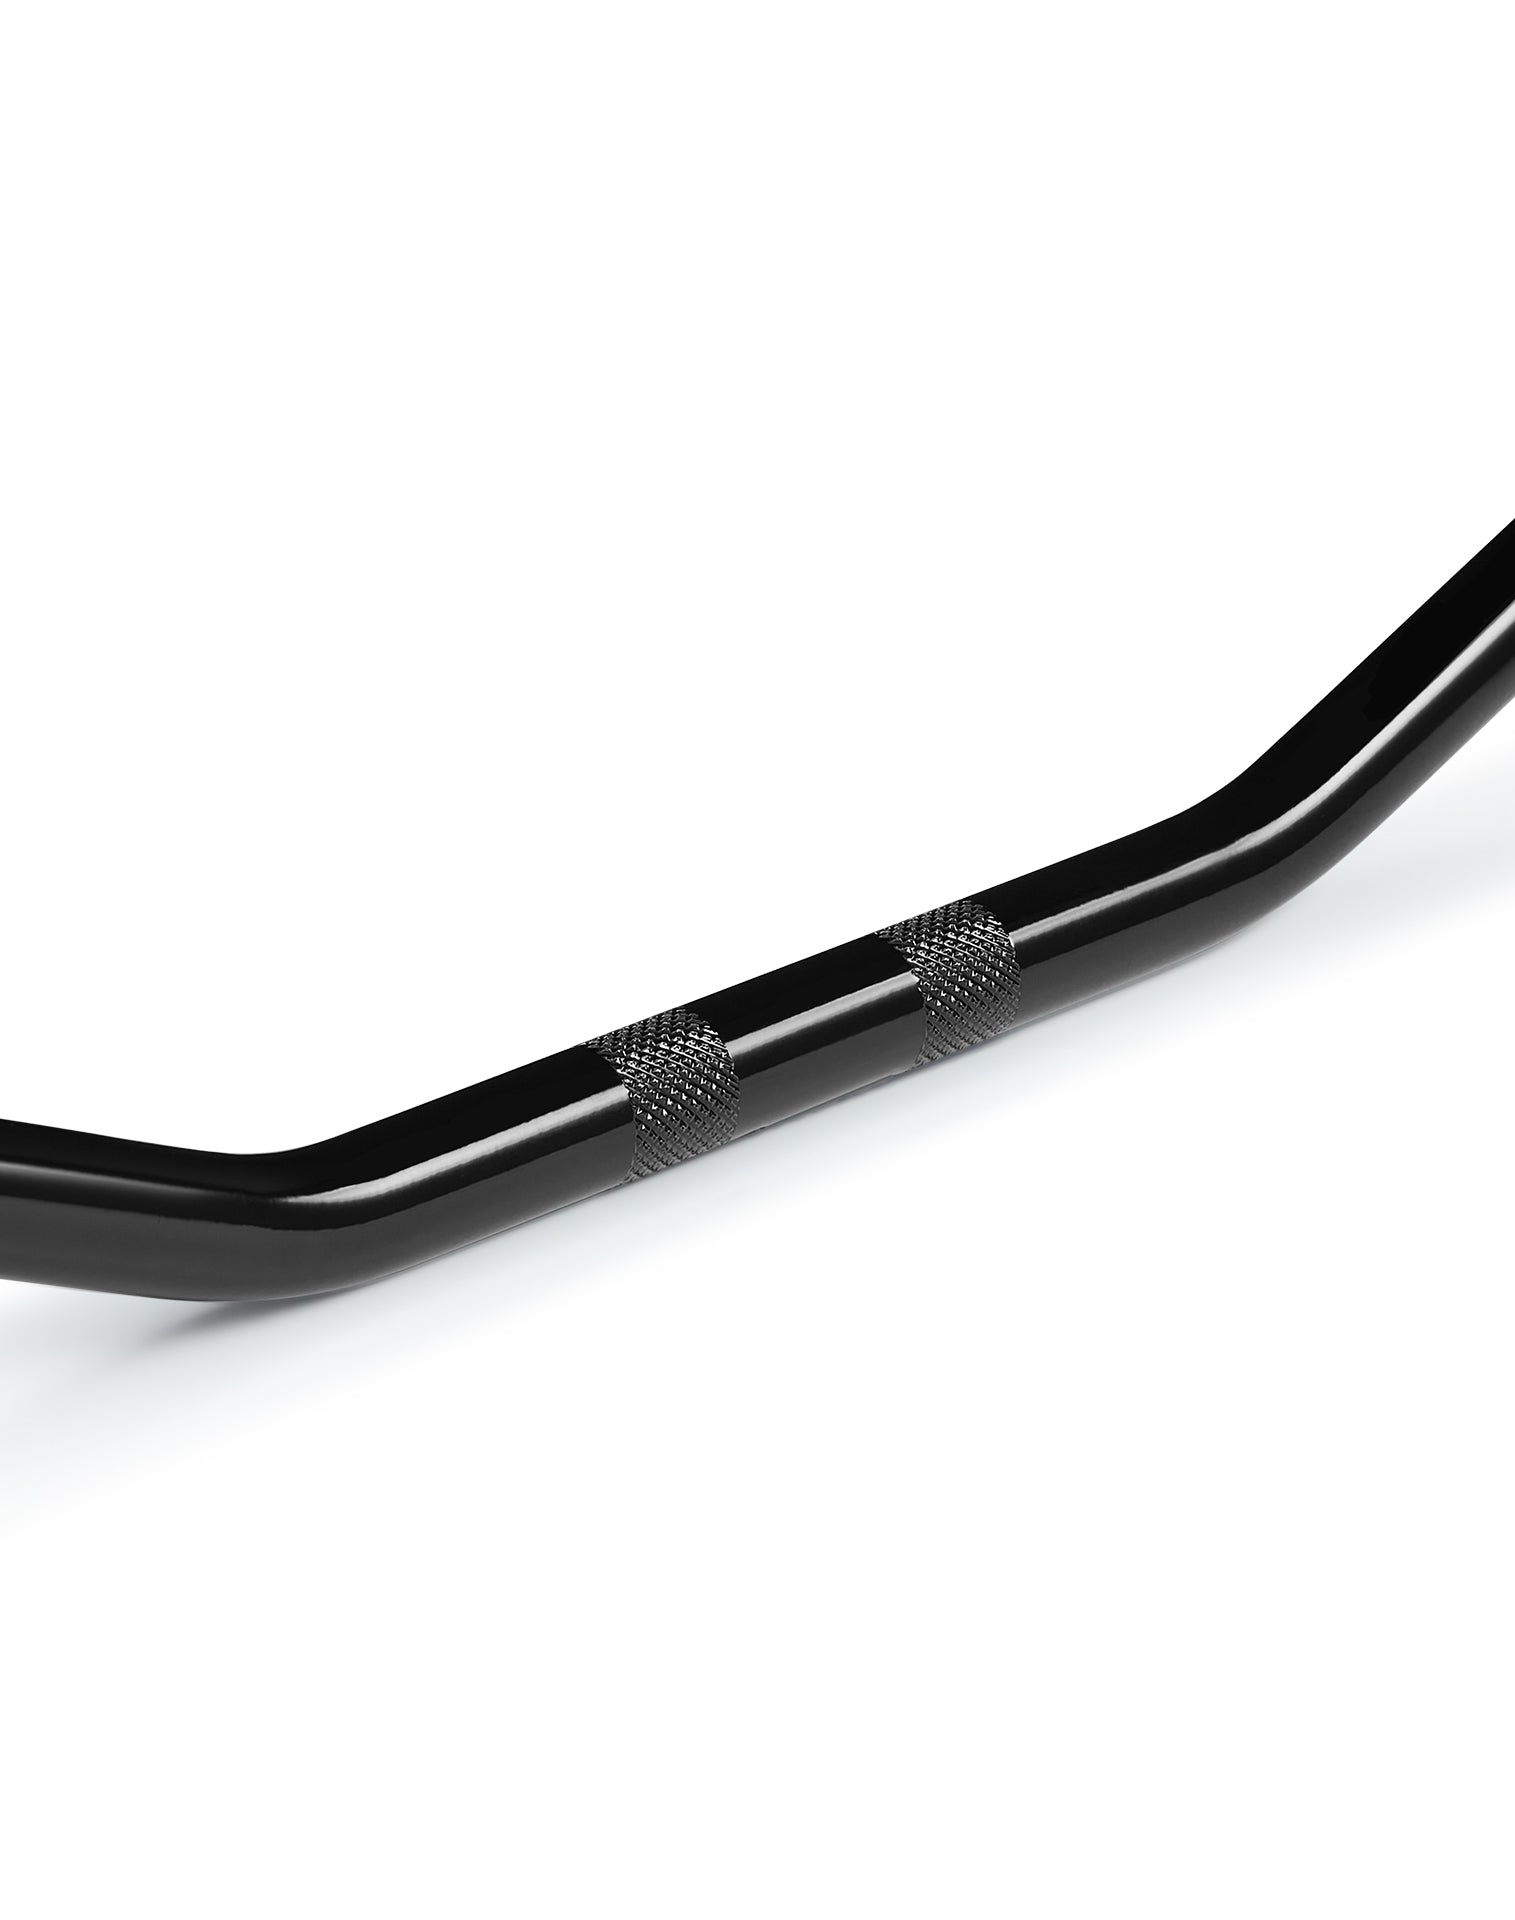 Viking Iron Born Drag Handlebar For Harley Dyna Wide Glide FXDWG Gloss Black Close Up View